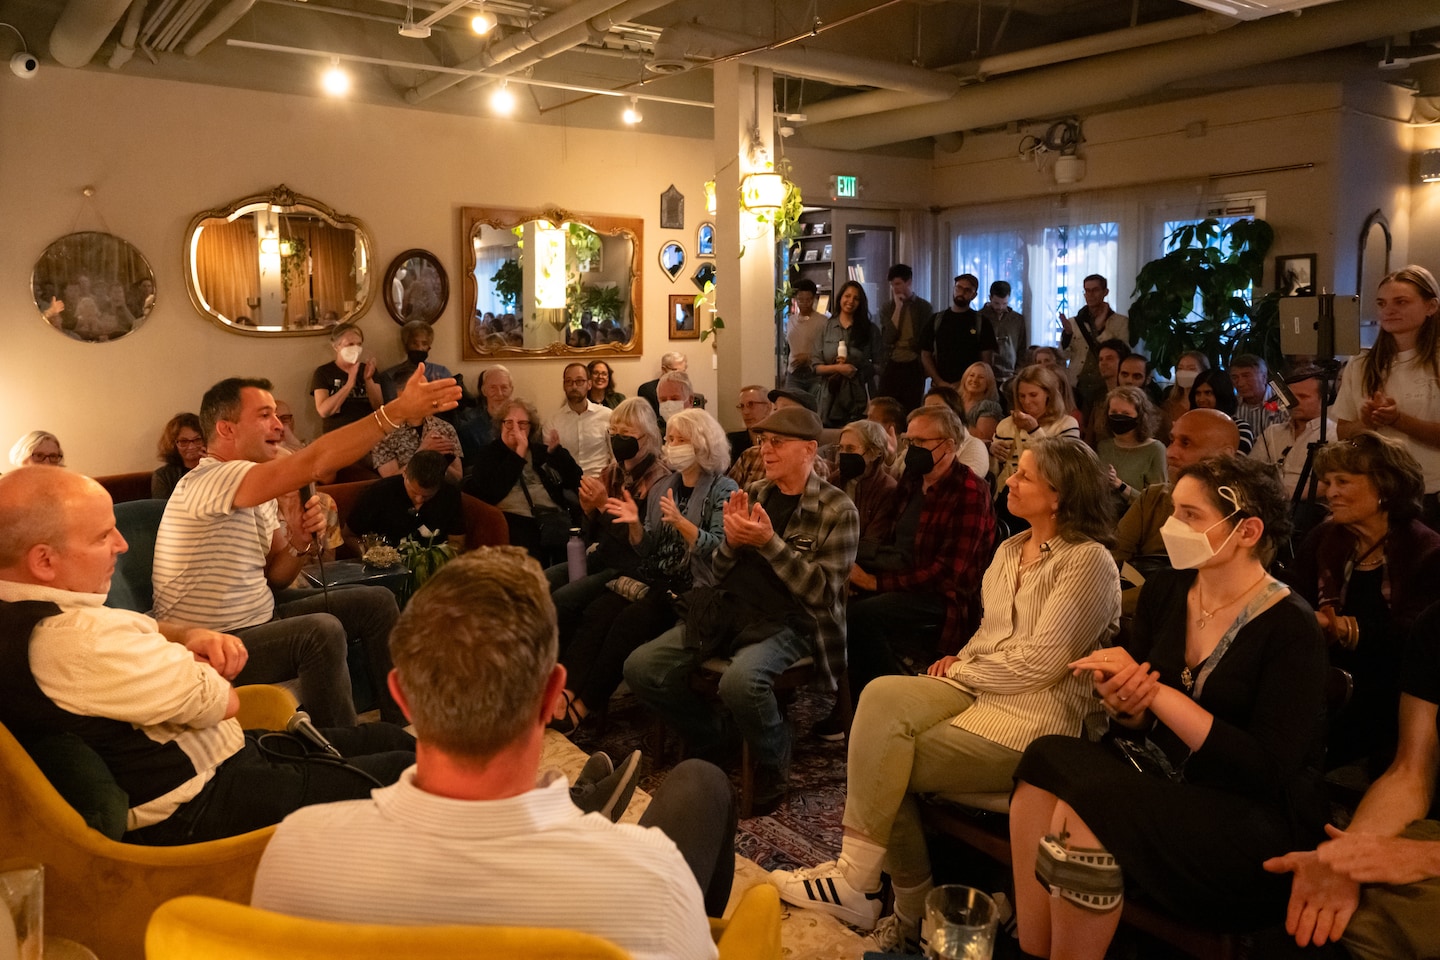 San Francisco café offers Democrats a place to share fears or new hopes